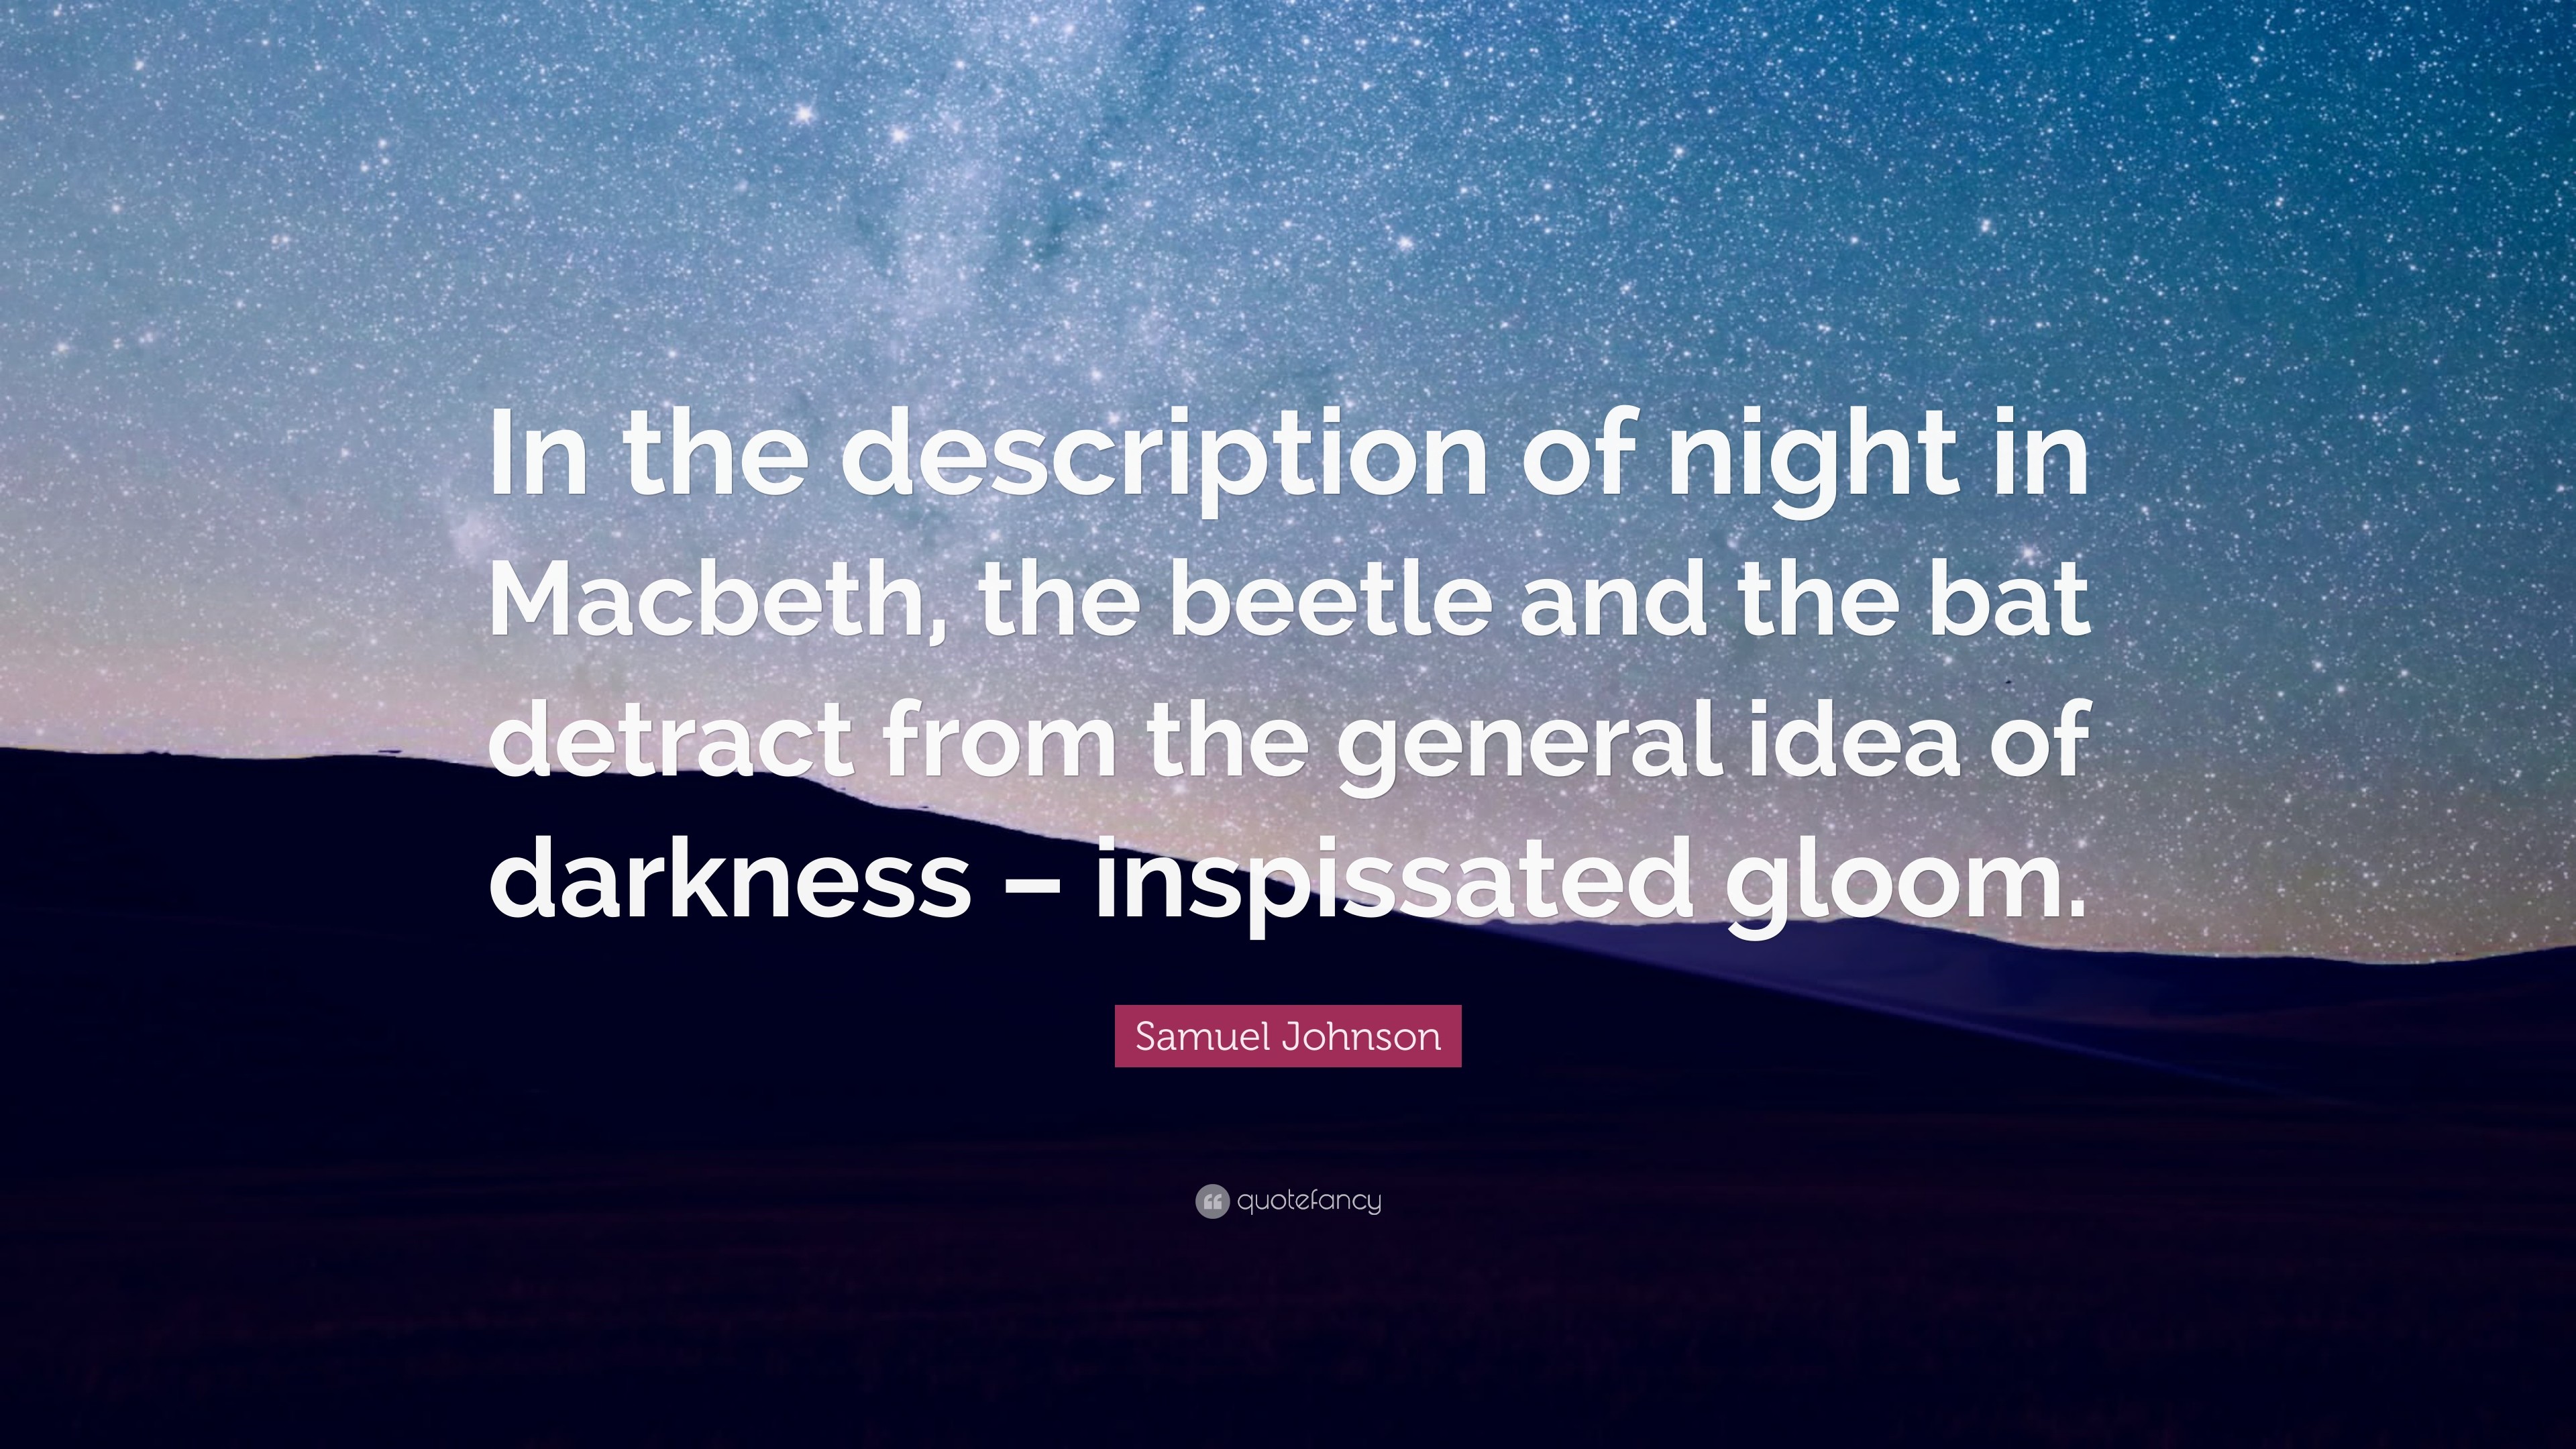 3840x2160 Samuel Johnson Quote: “In the description of night in Macbeth, the beetle  and